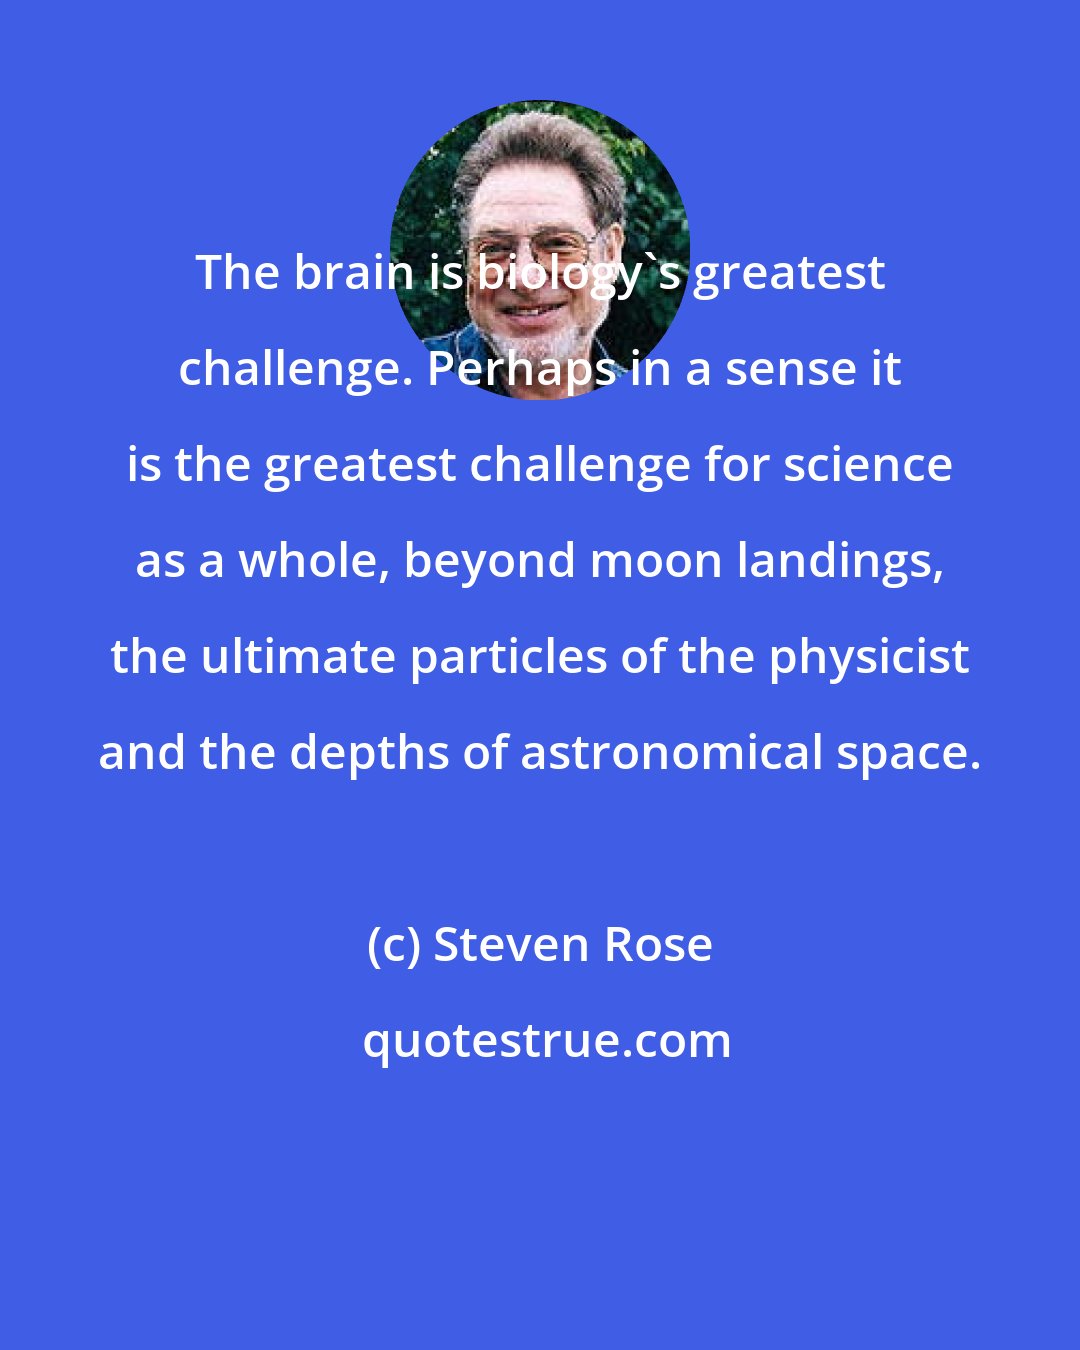 Steven Rose: The brain is biology's greatest challenge. Perhaps in a sense it is the greatest challenge for science as a whole, beyond moon landings, the ultimate particles of the physicist and the depths of astronomical space.